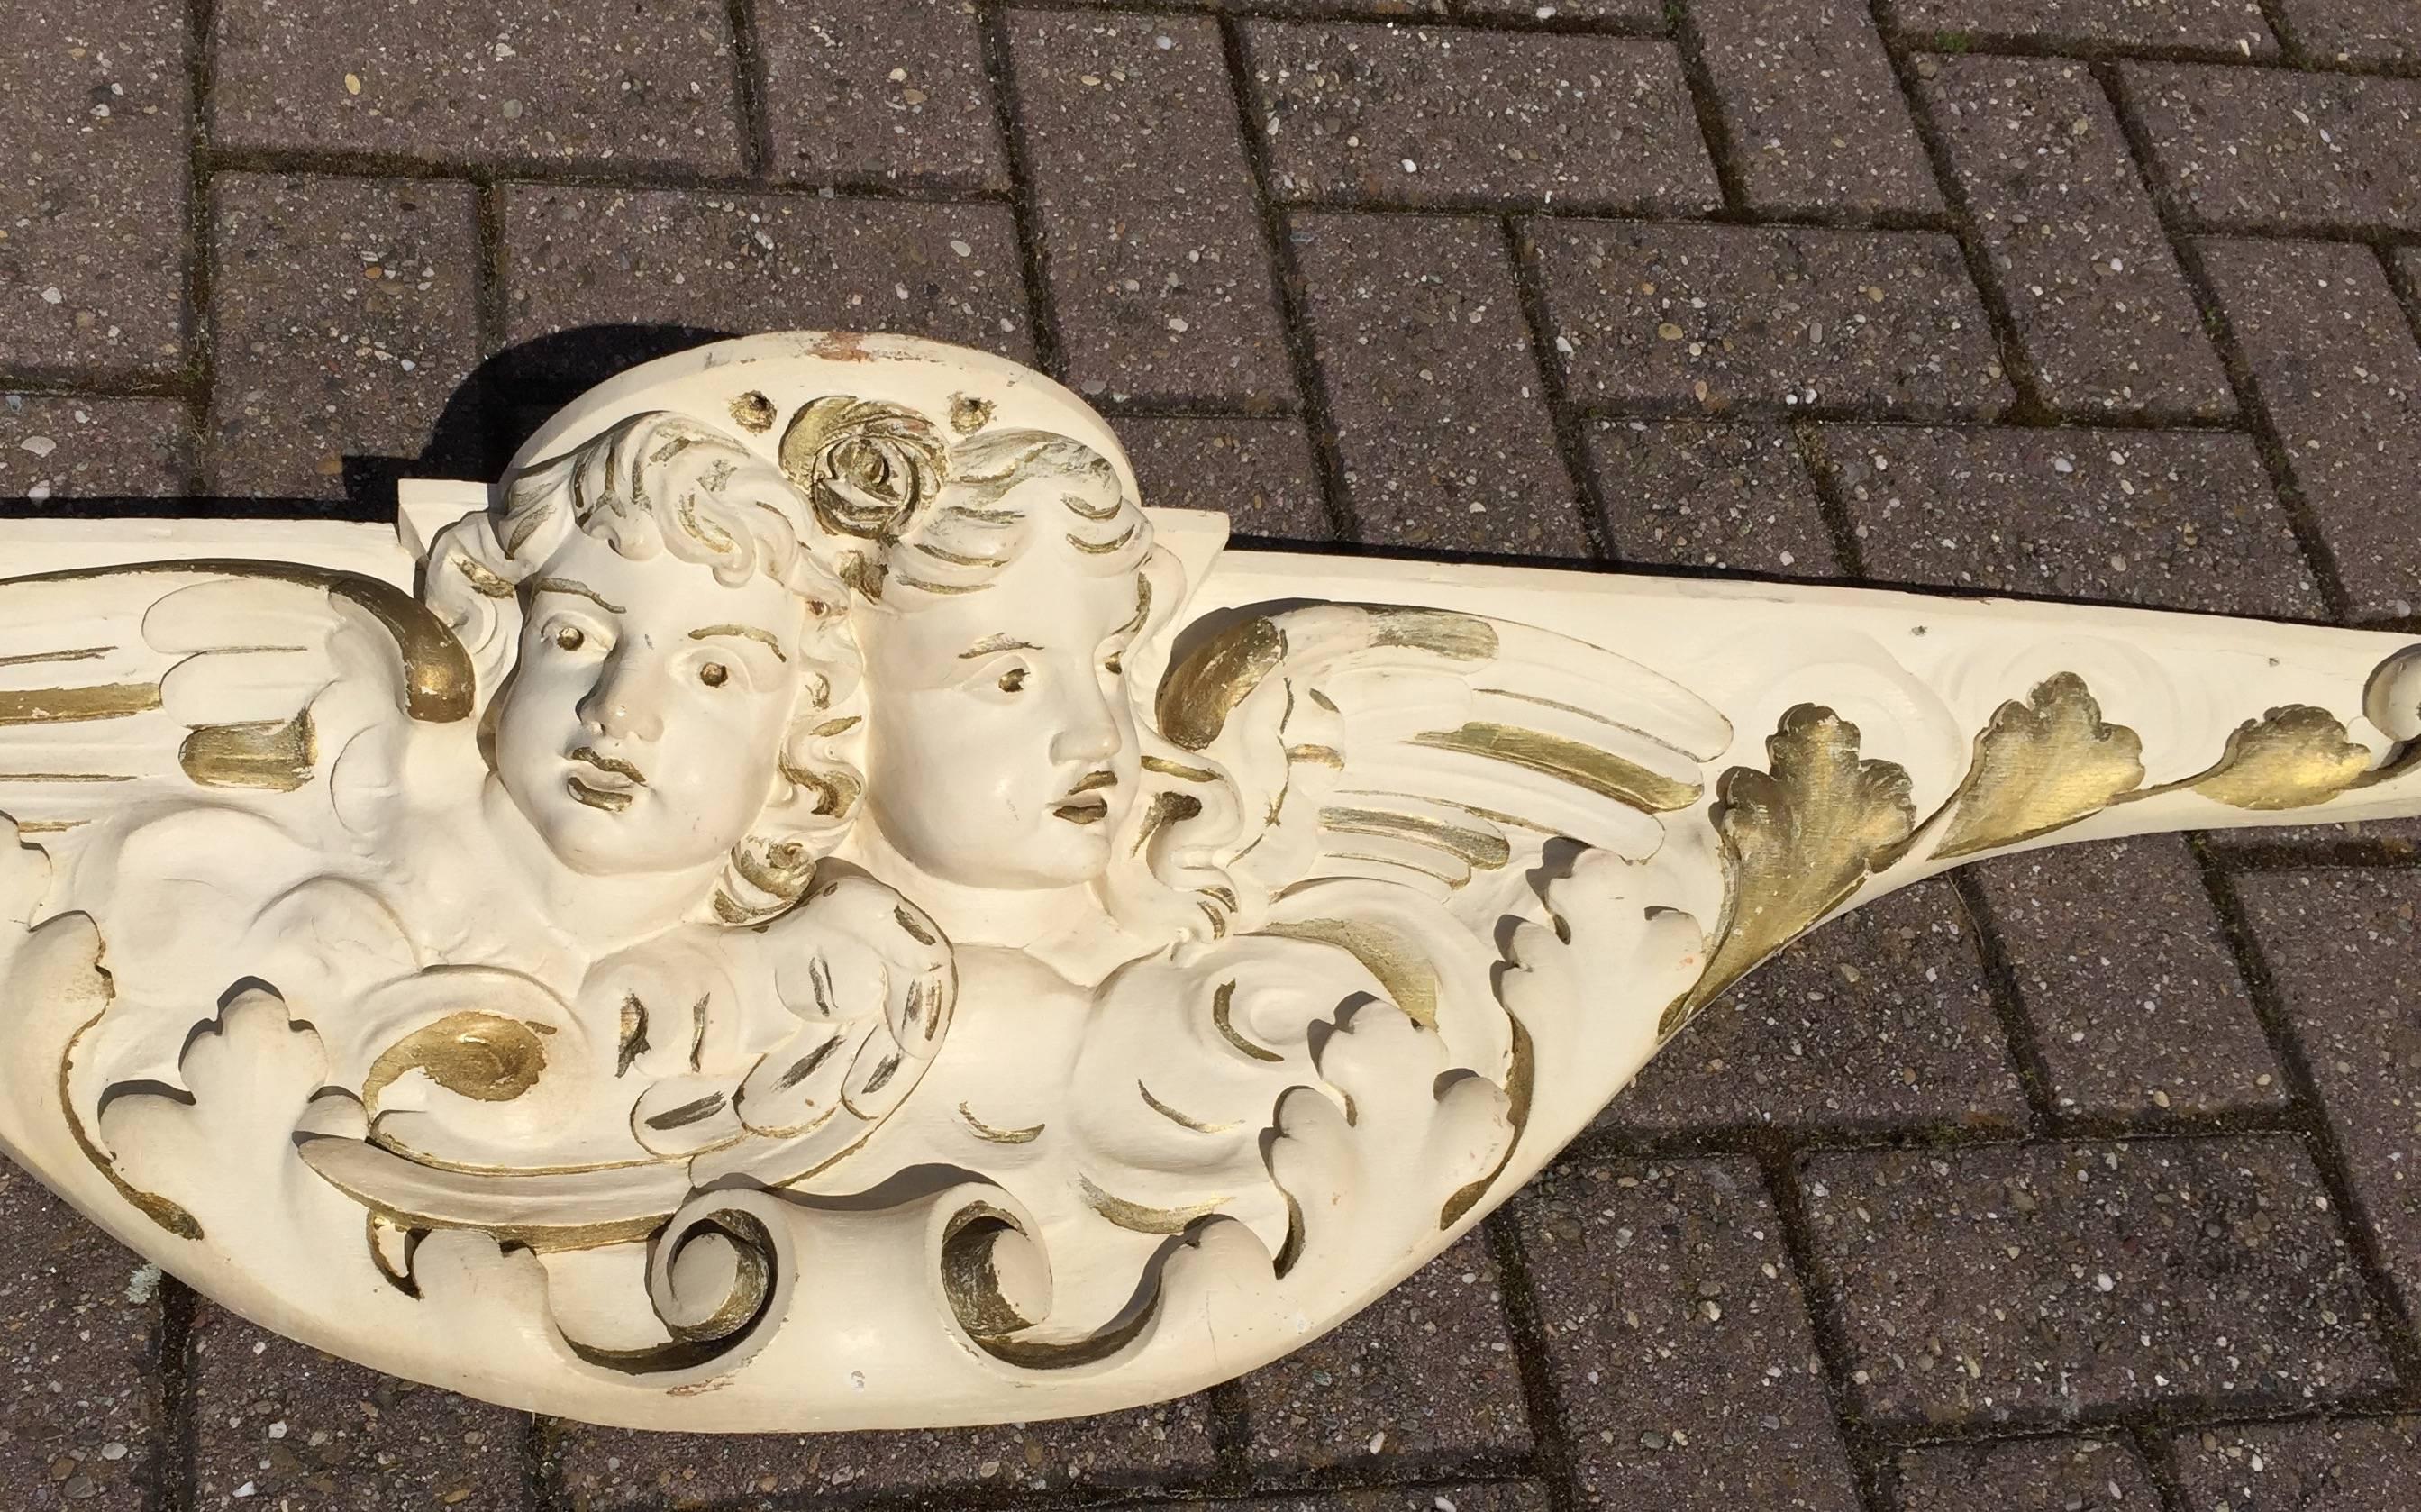 Large and lovely 19th century figural wall bracket

This angelic wall bracket is a great decorator's piece. It is entirely sculpted by hand and out of solid oak. It is painted in beige and gold color and the winged angels look down from the sky.